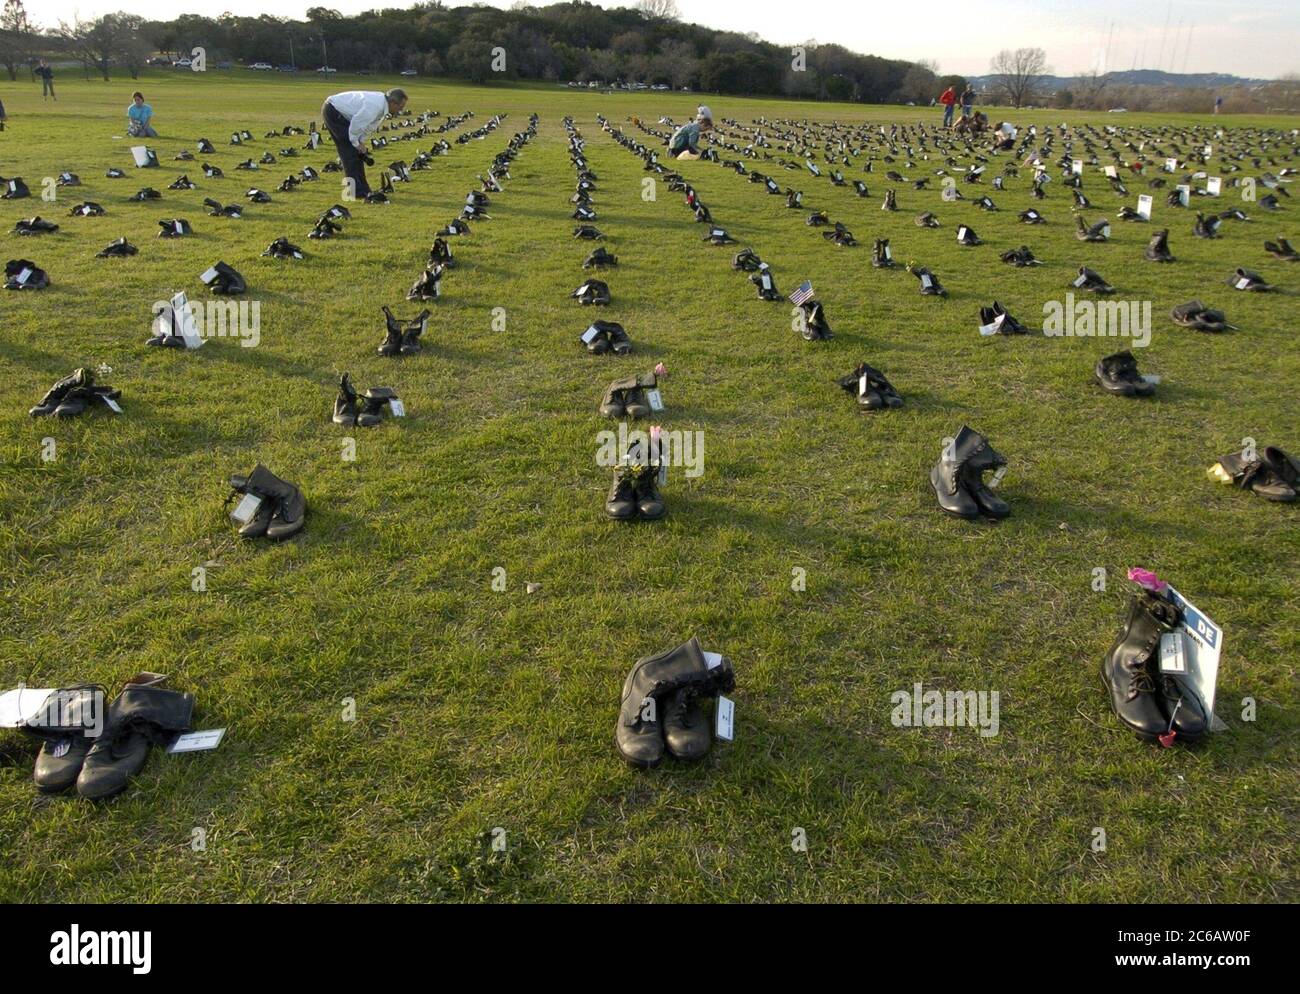 Military combat boots representing American service members killed in the conflict in Iraq dot a grassy expanse in Zilker Park in Austin Texas. The dramatic display is part of a national traveling tour, 'Eyes Wide Open: The Human Cost of War in Iraq' co-sponsored by the American Friends Service Committee. ©Bob Daemmrich Stock Photo